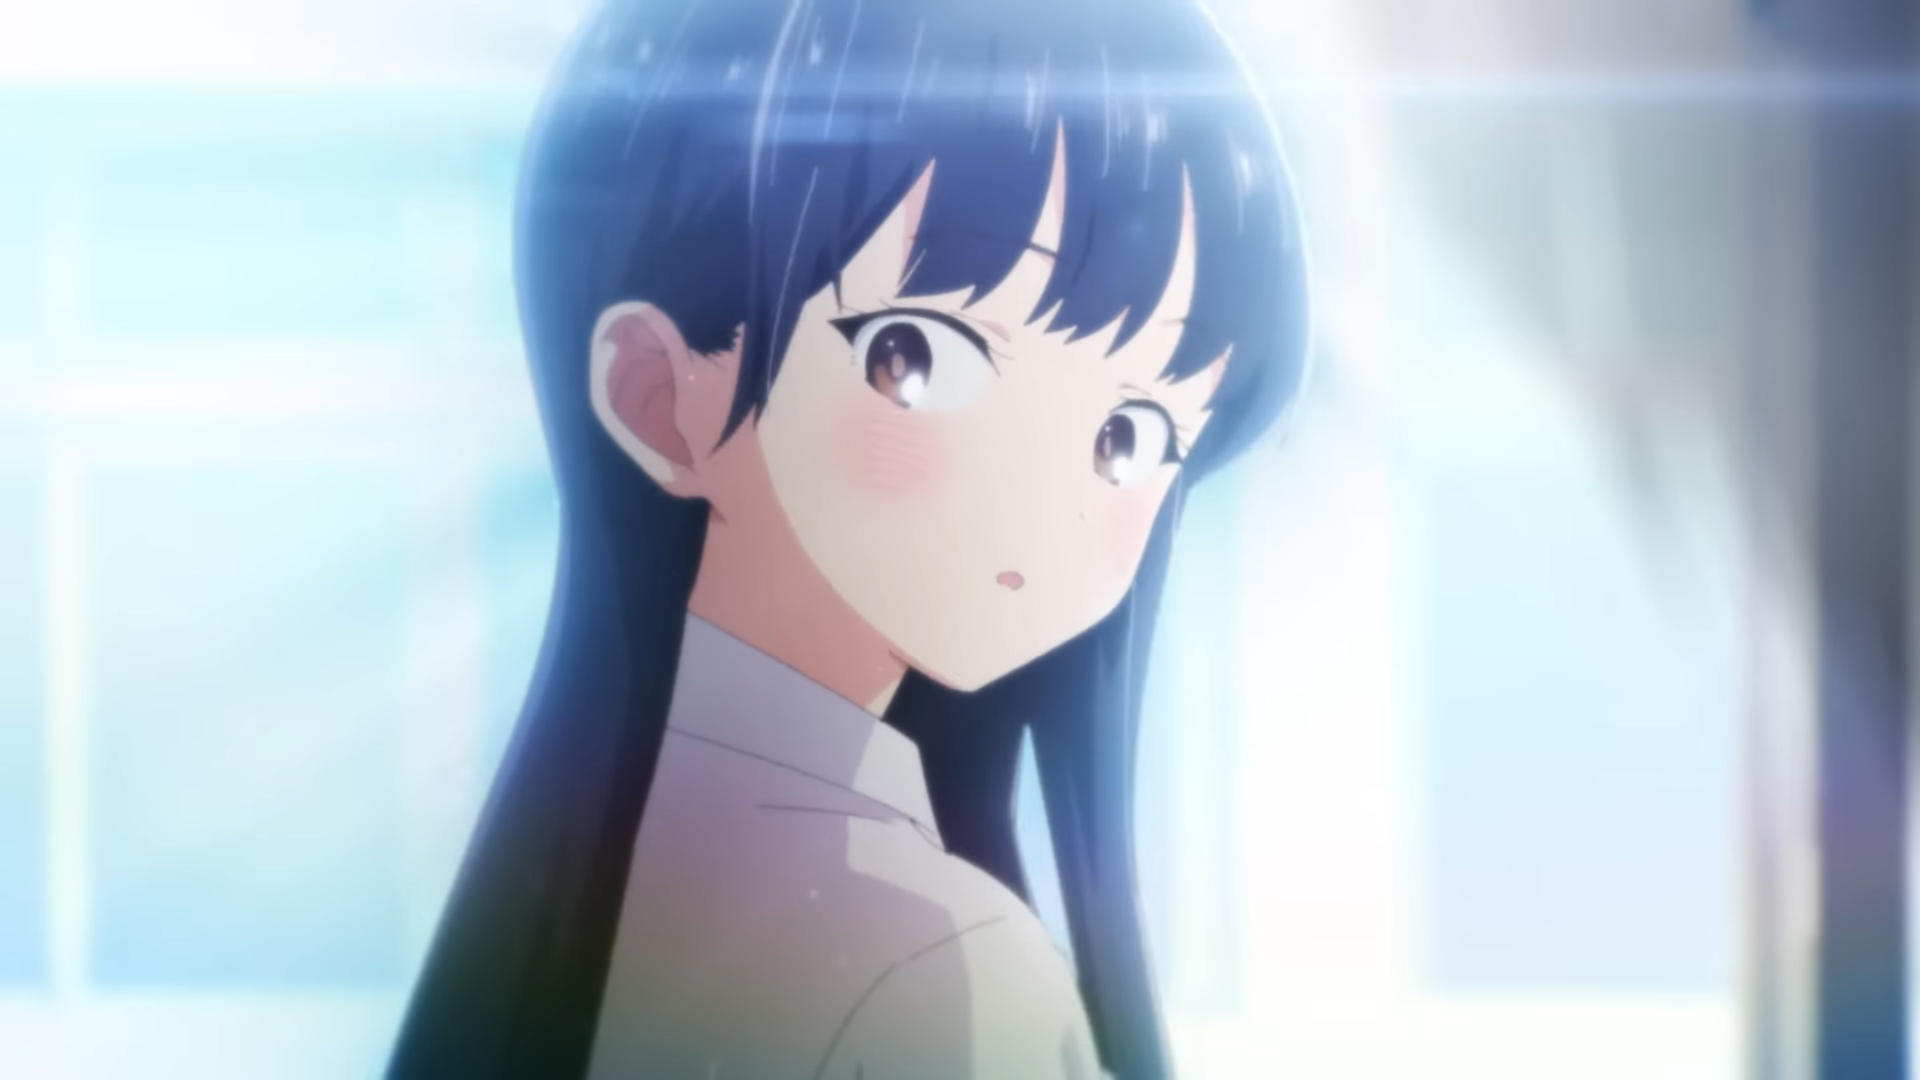 The Dangers in My Heart Anime Revealed, April 2023 Premiere